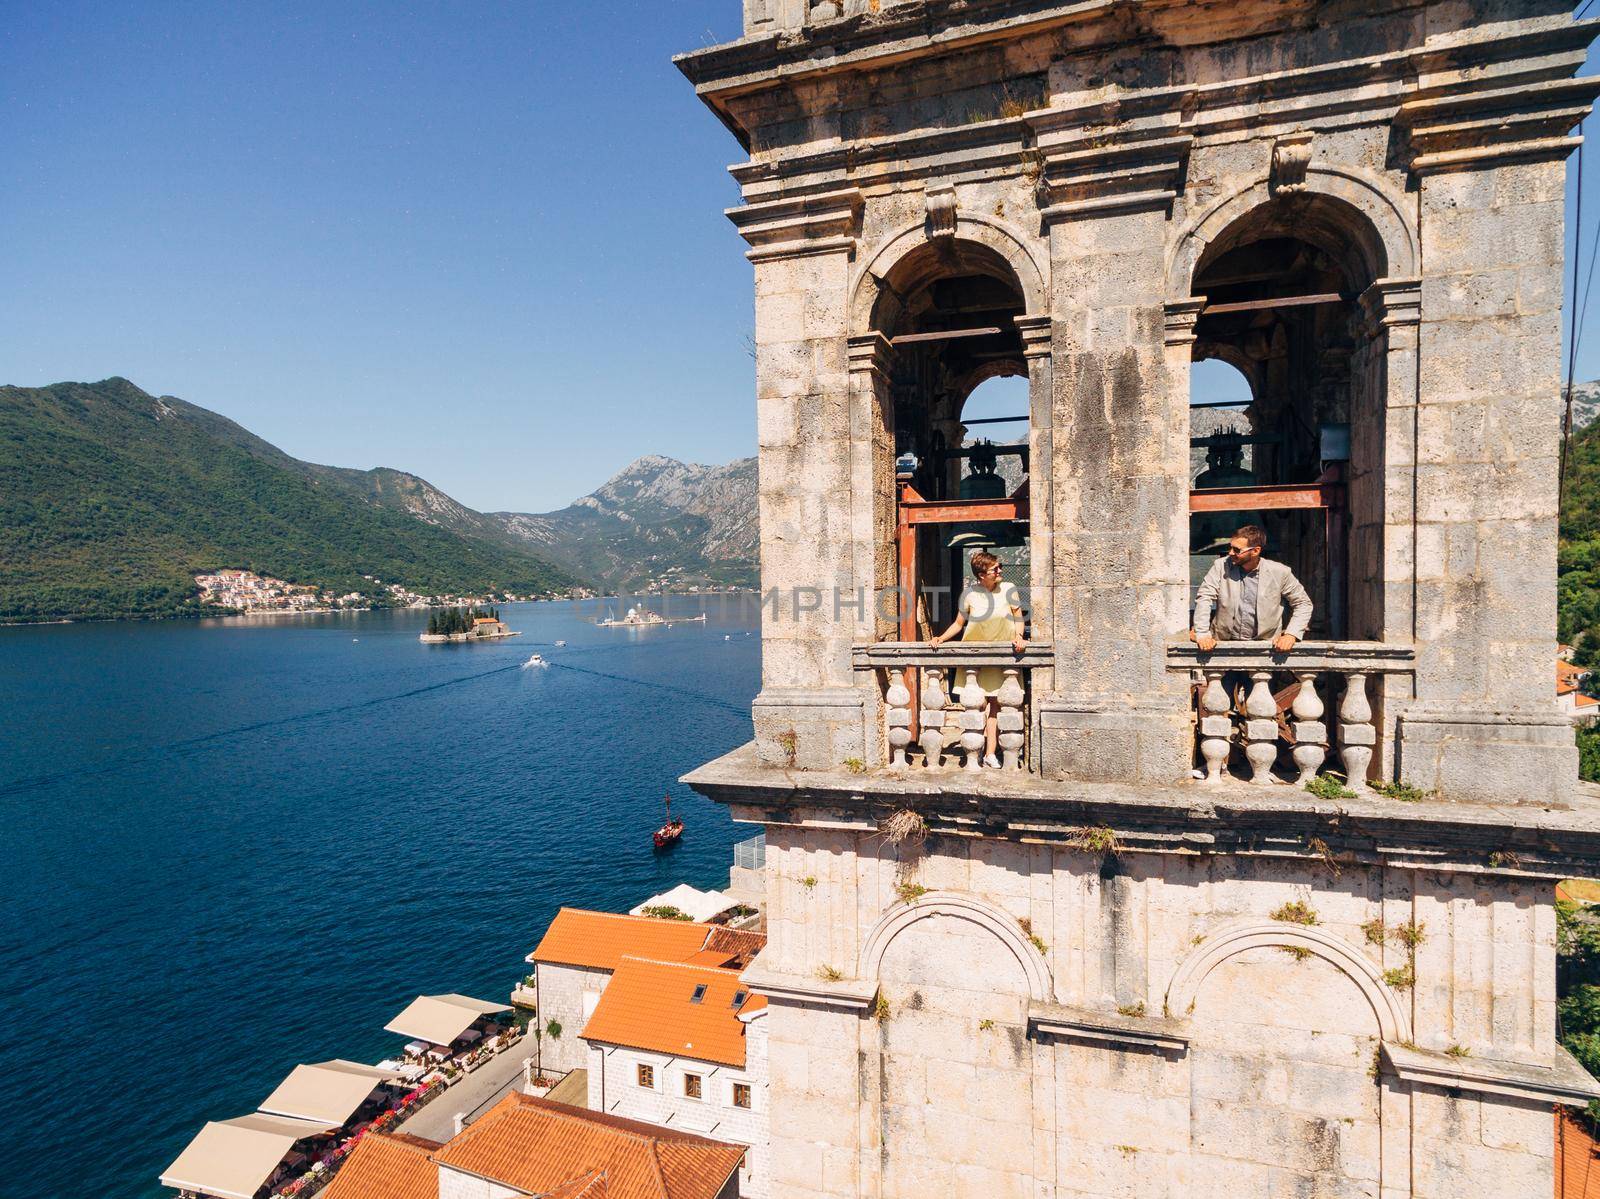 A man and a woman look out of the windows of the tower and look at each other over the old town of Perast by Nadtochiy